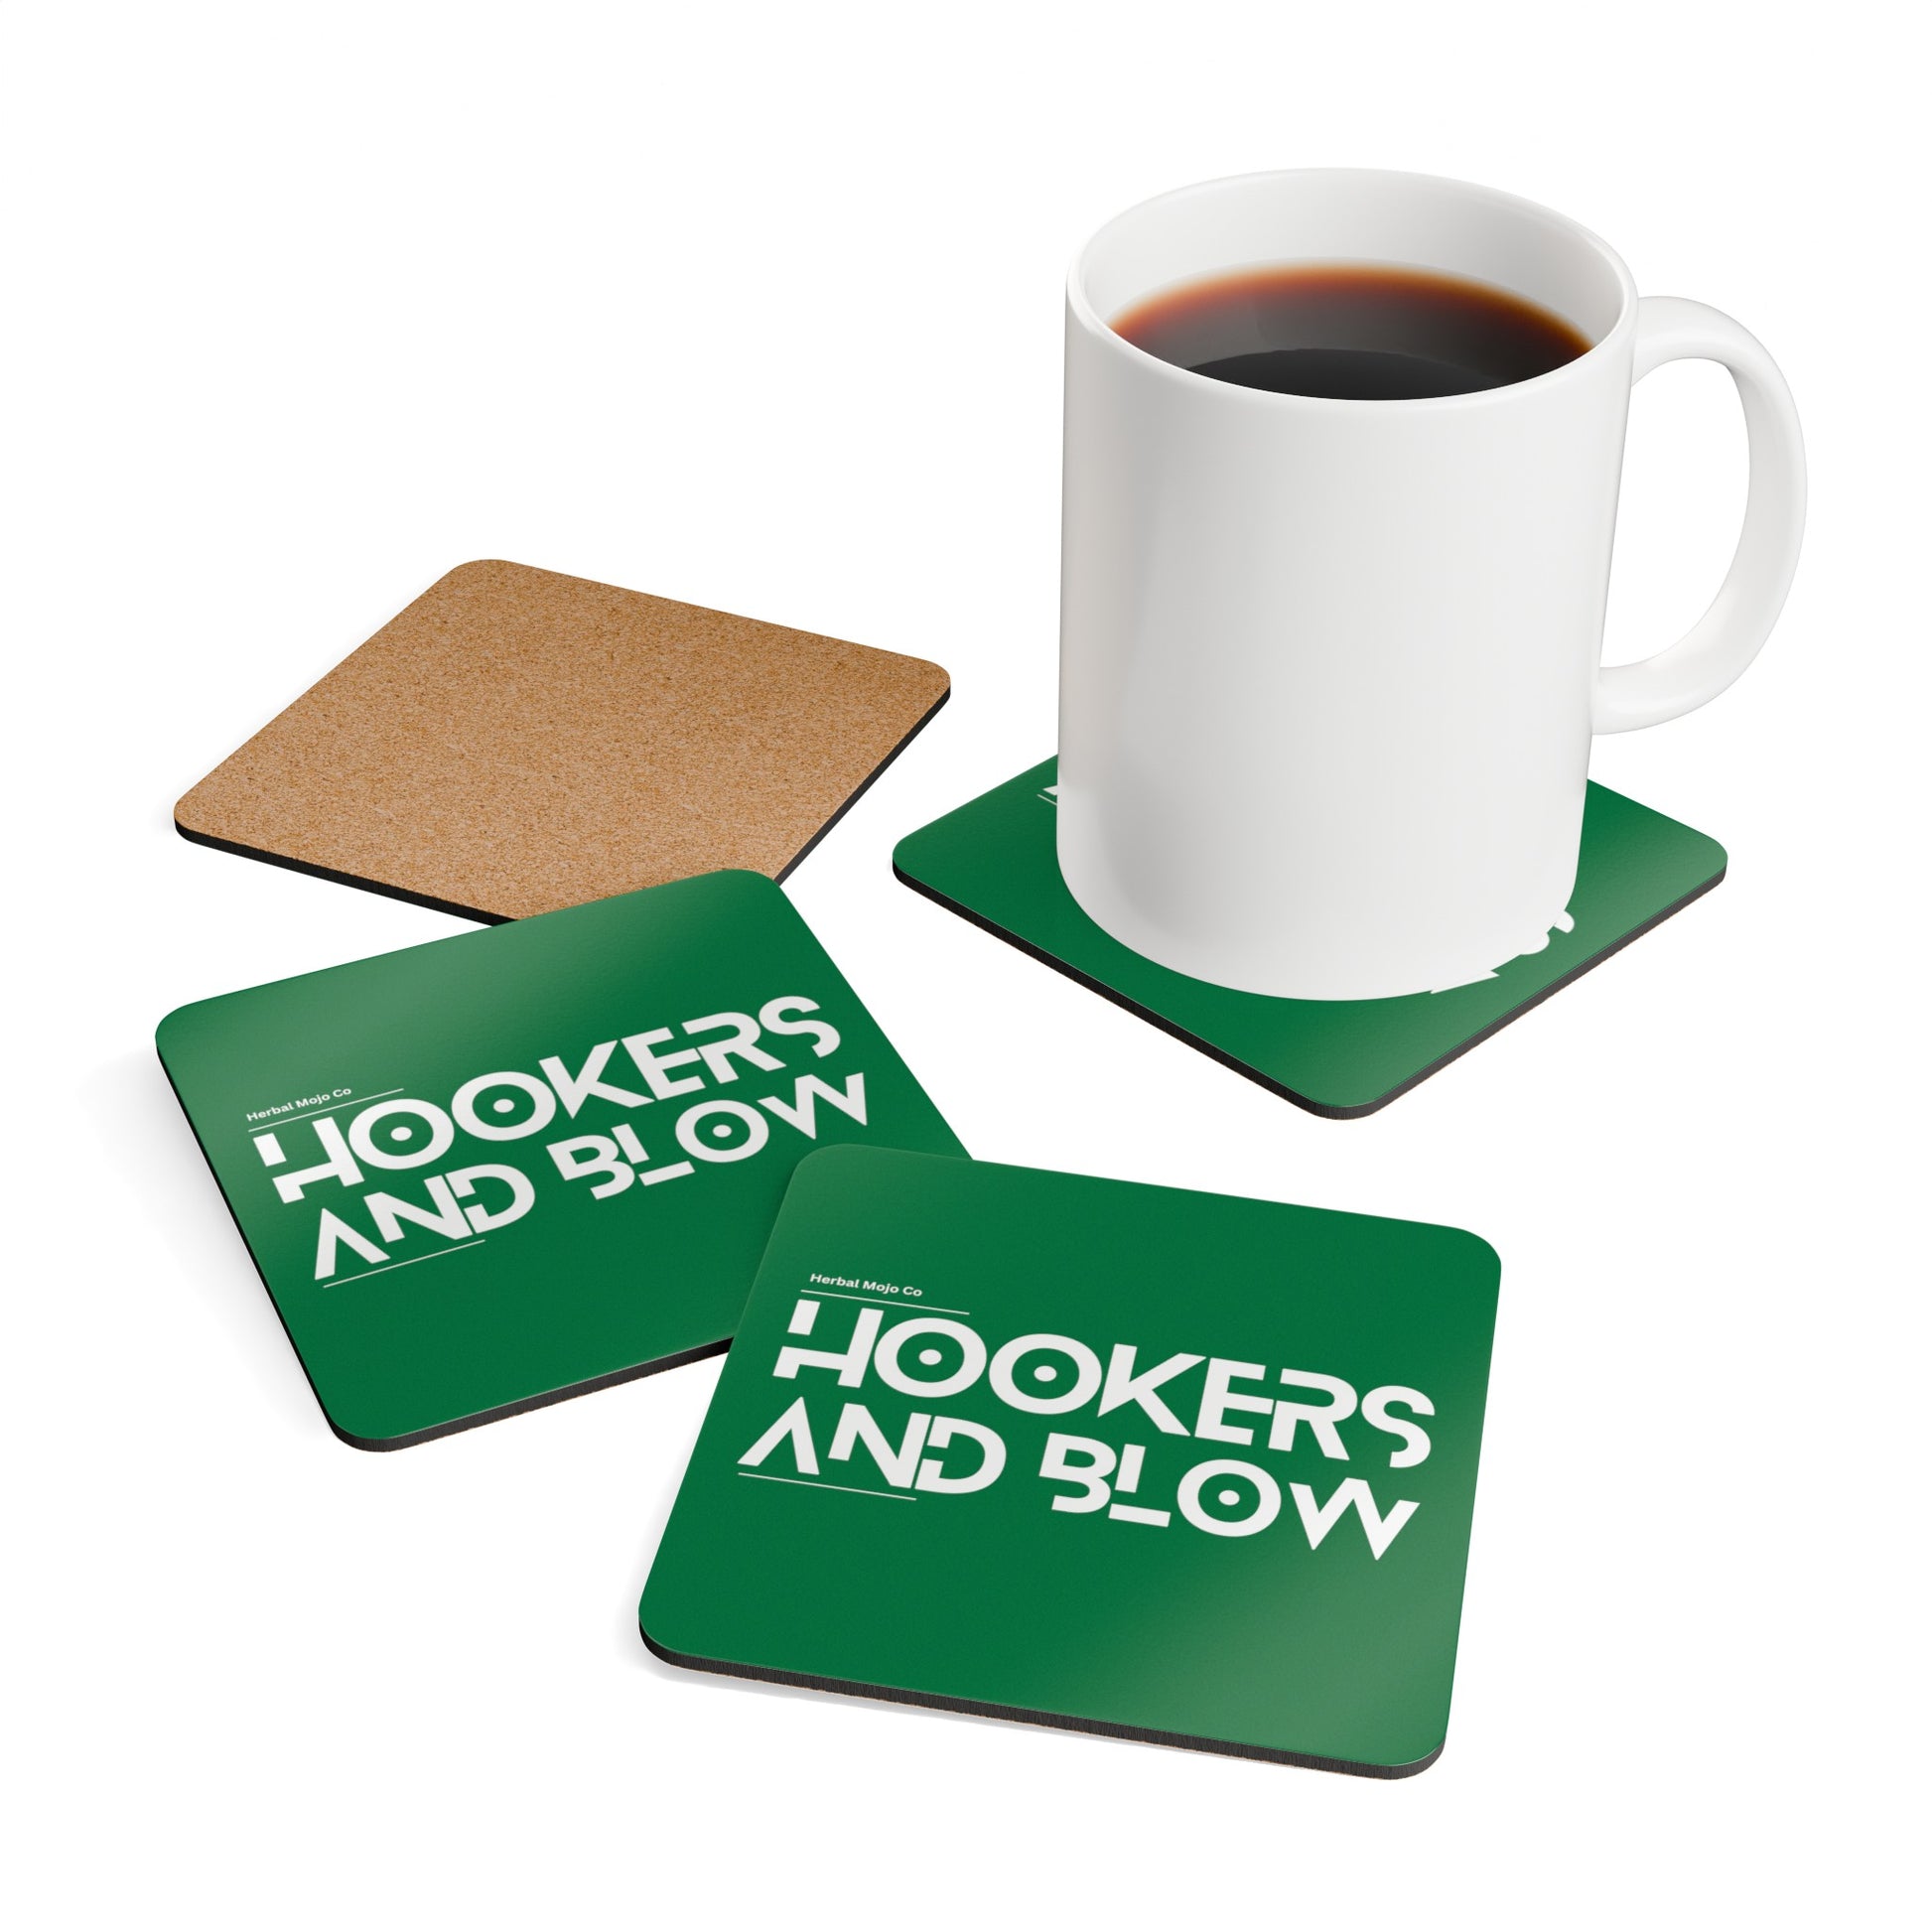 Stamina for Men Hookers & Blow Coaster set product shot in context with white coffee mug